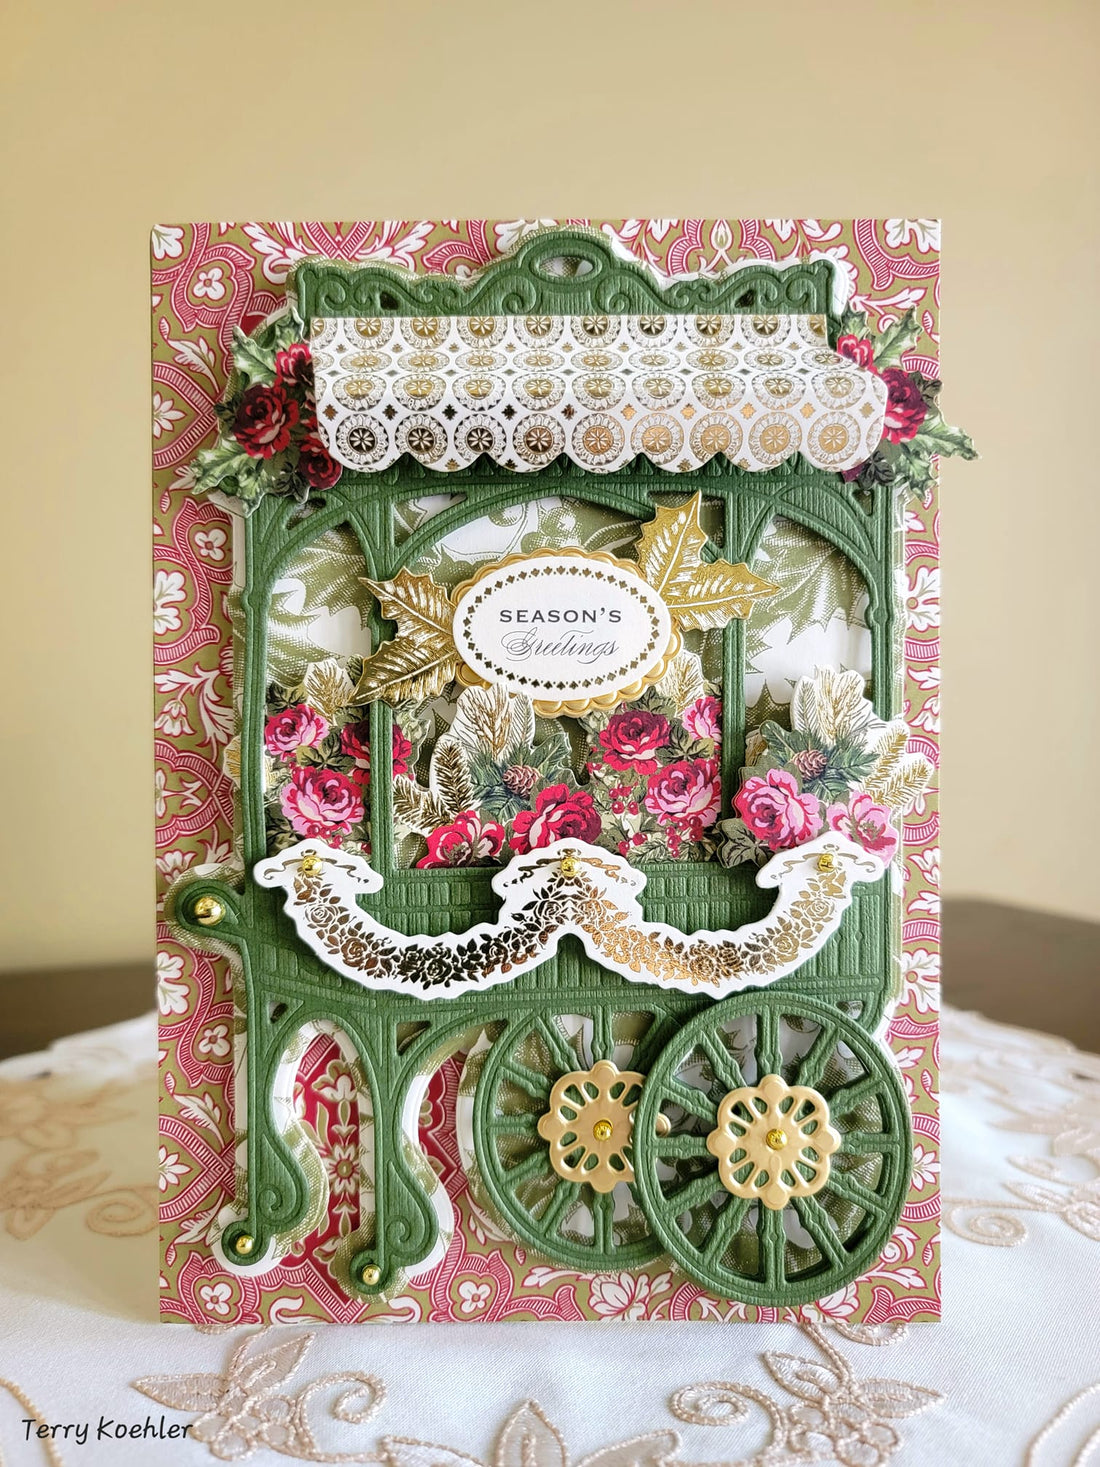 A card with a carriage and flowers on it.